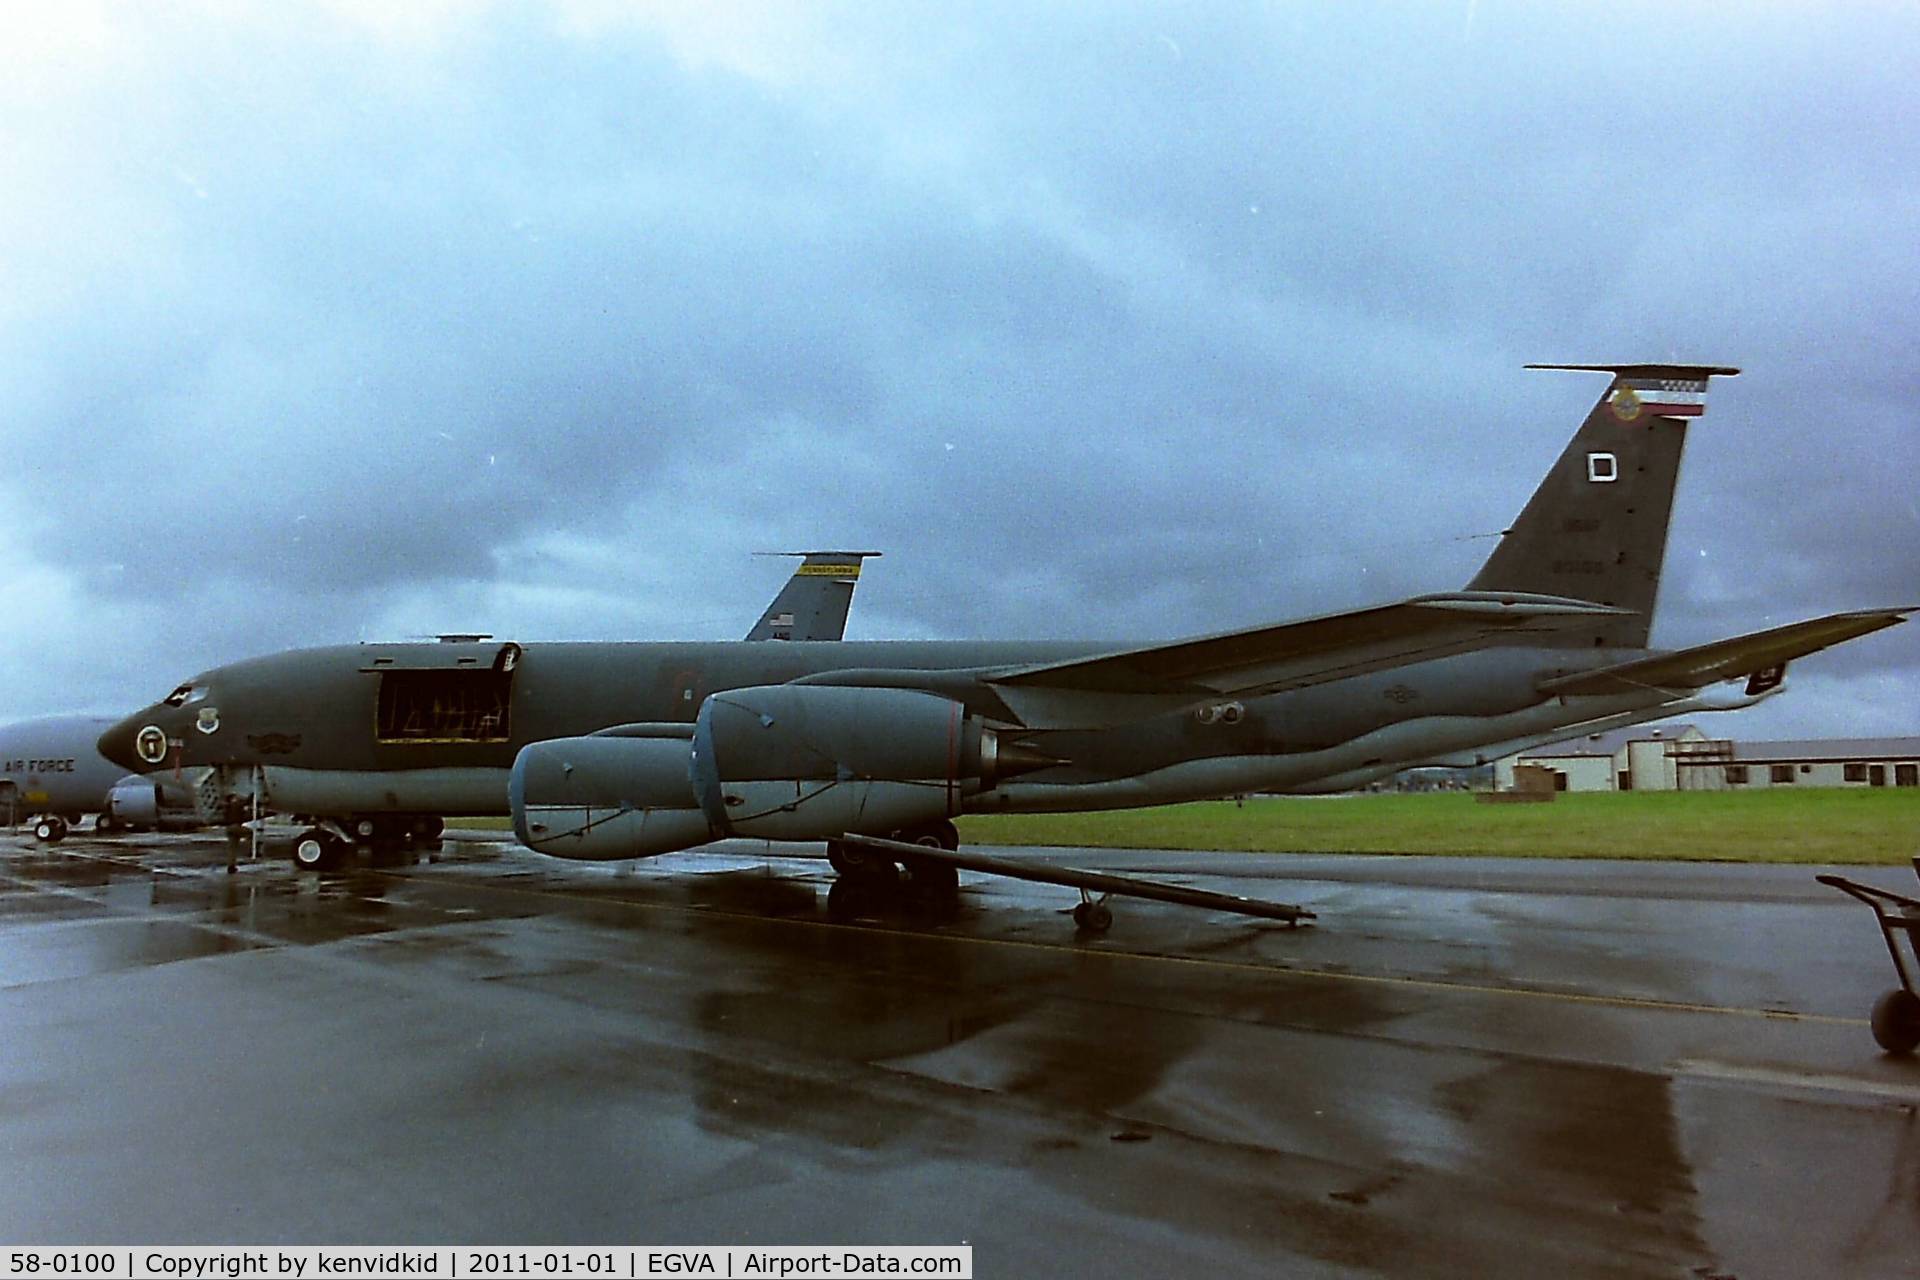 58-0100, 1958 Boeing KC-135R Stratotanker C/N 17845, At RIAT 1993, scanned from negative.